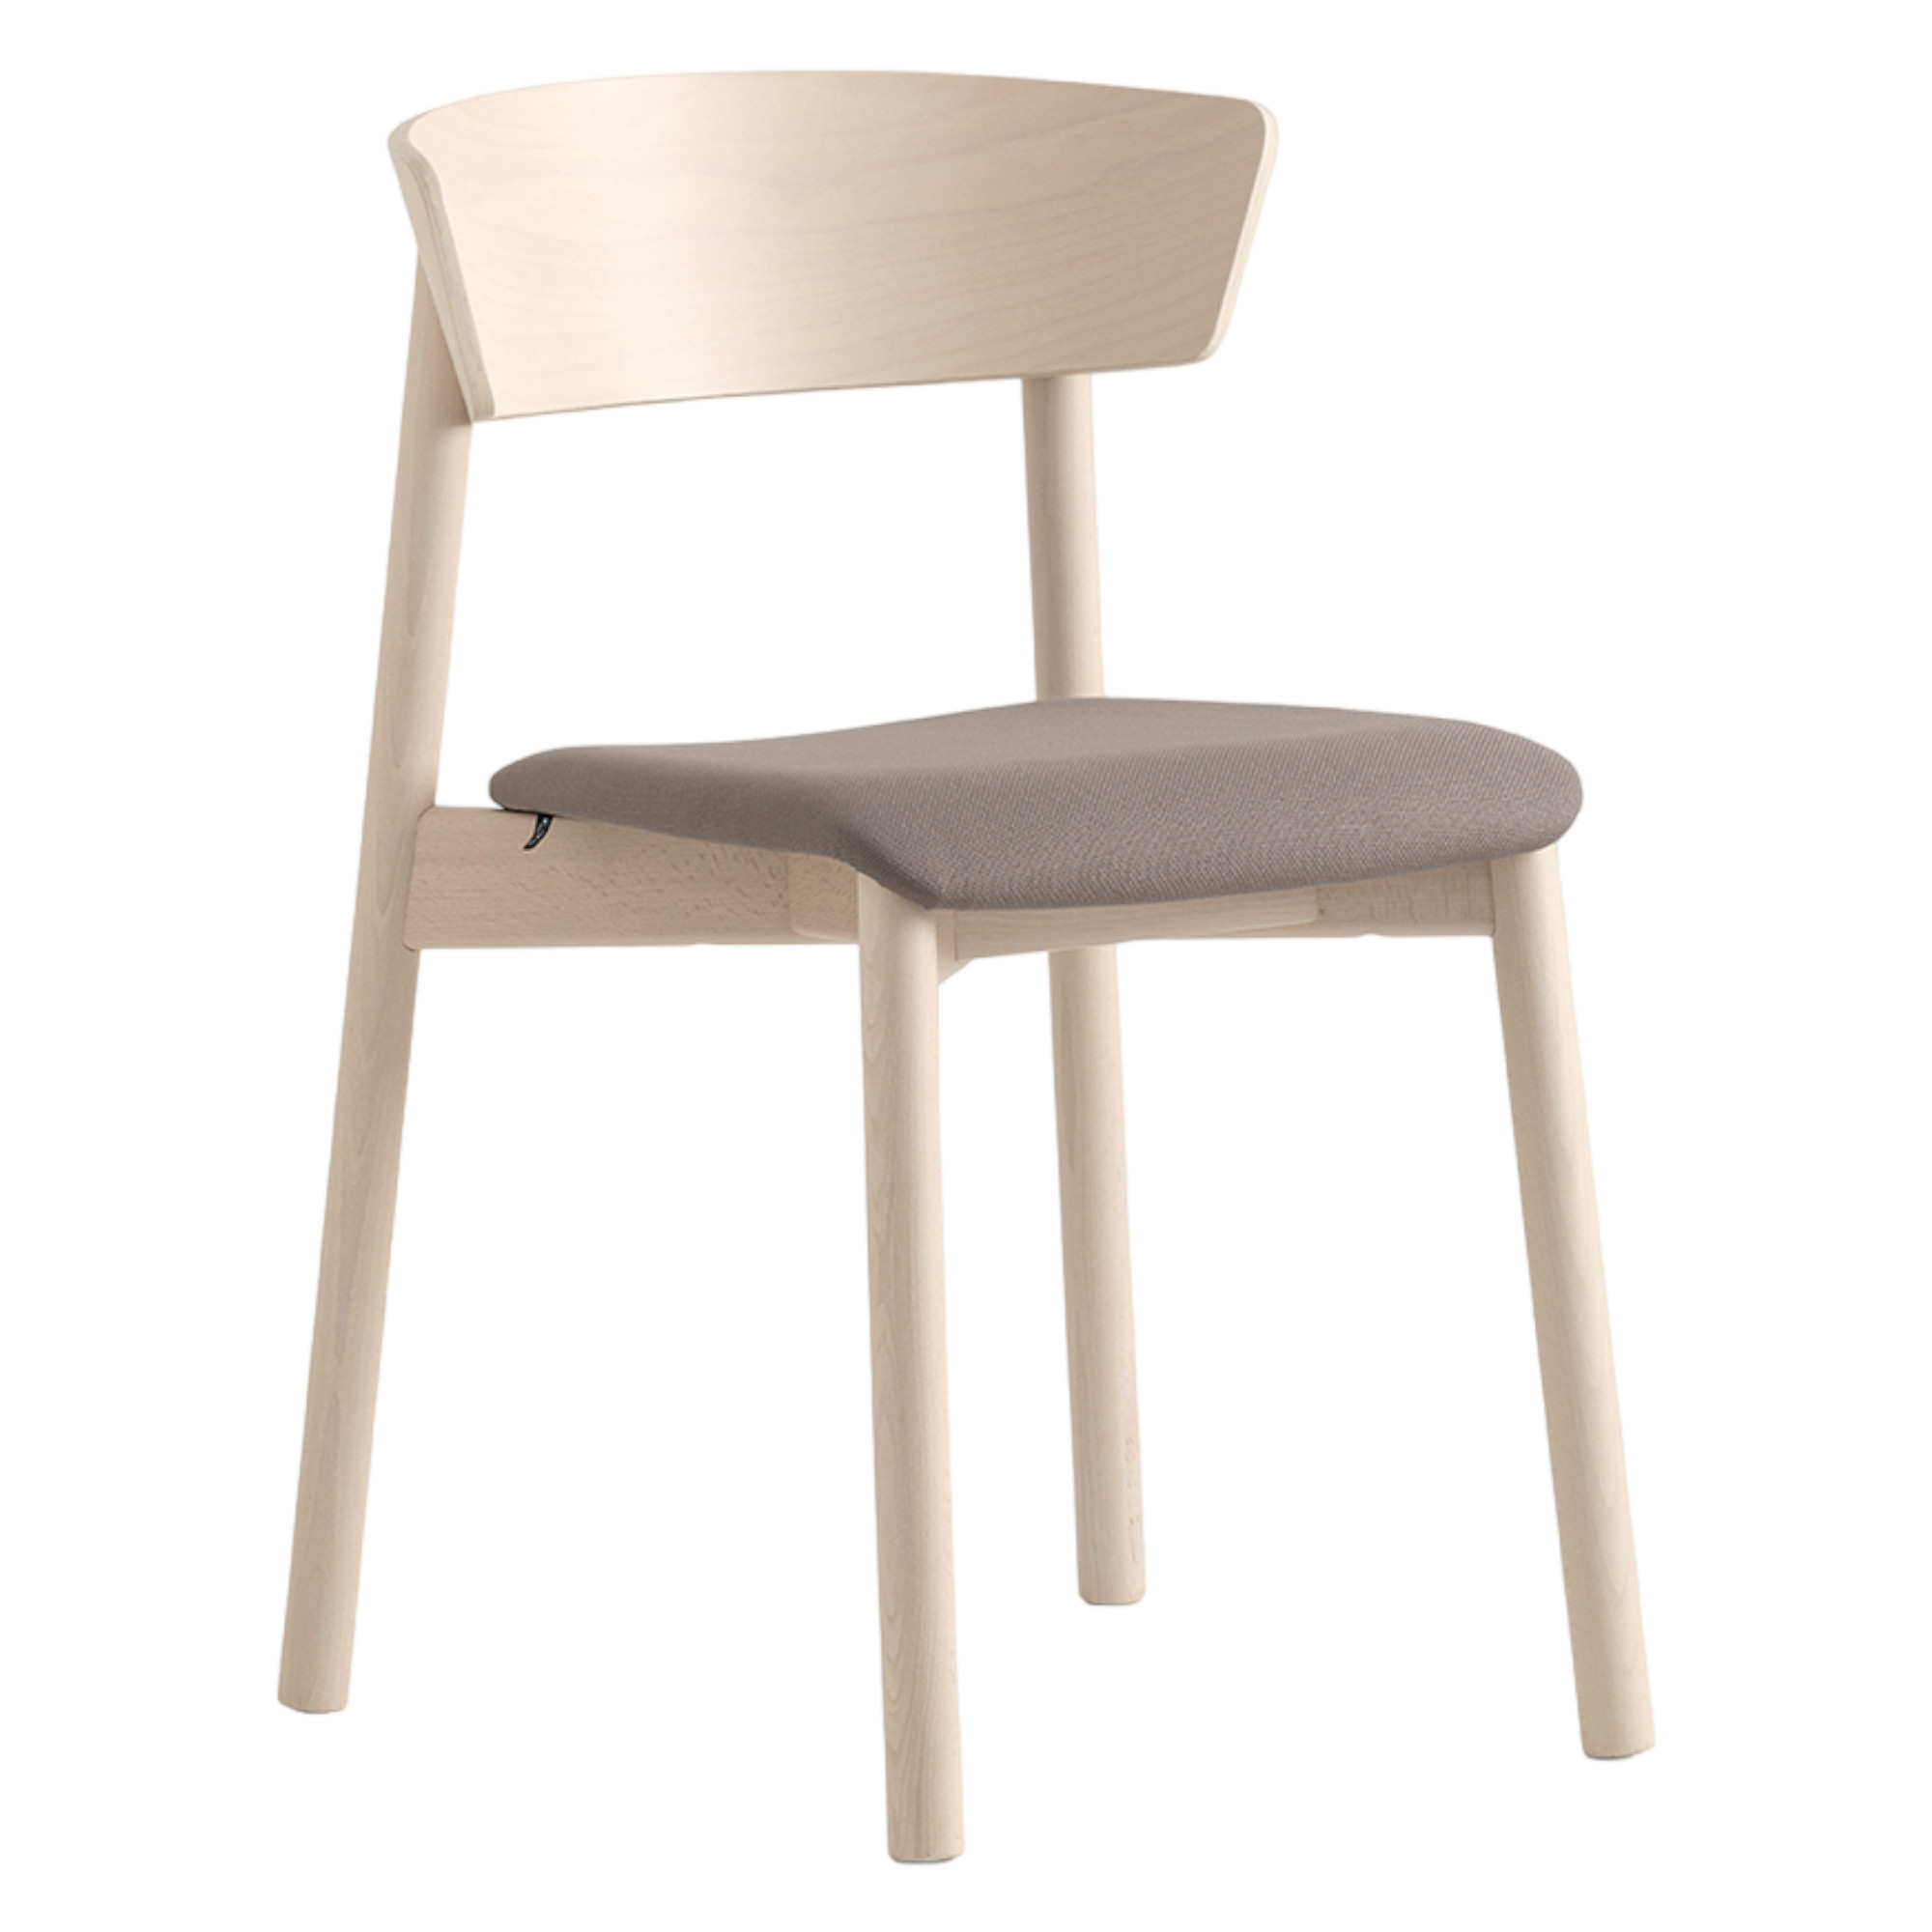 COVERED | Chairs | Masonionline CB/2120 CLELIA CONNUBIA CHAIR | Seats -